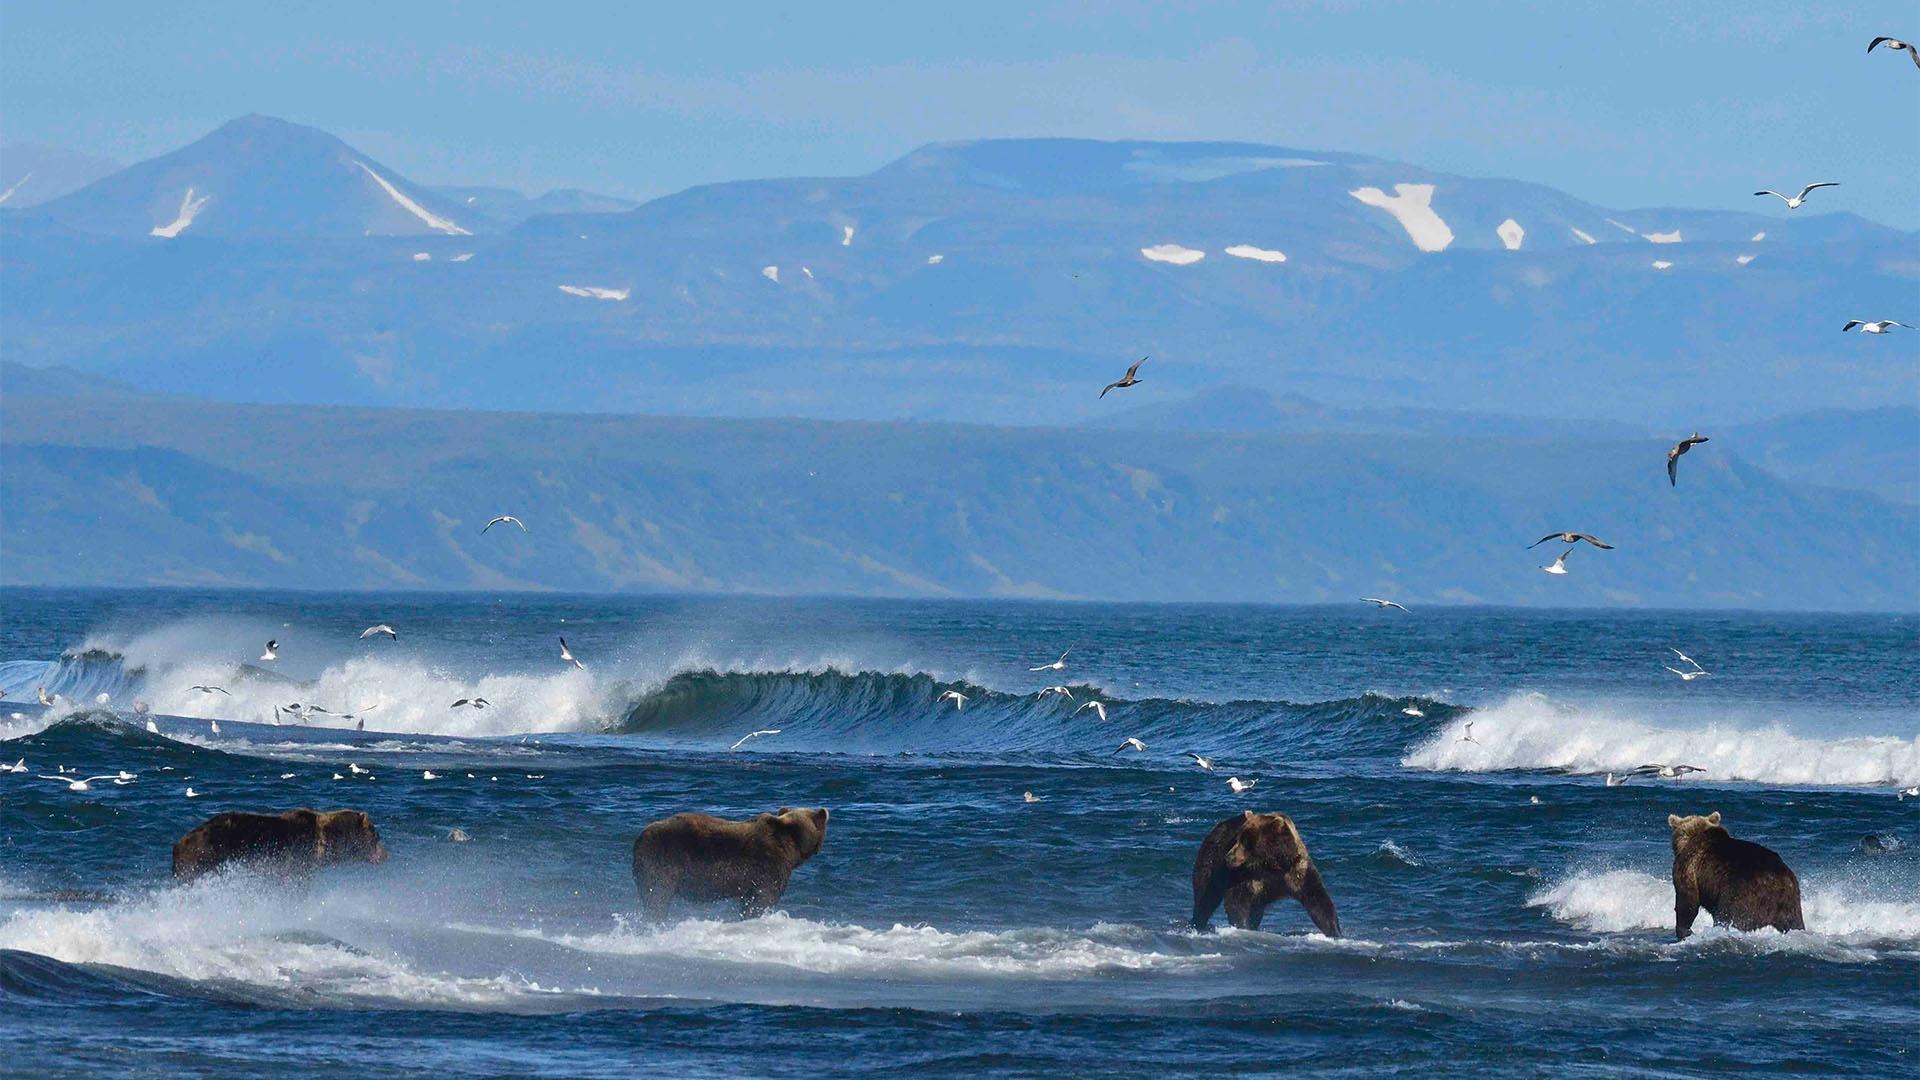 Brown bears hunt for salmon in the Pacific Ocean.